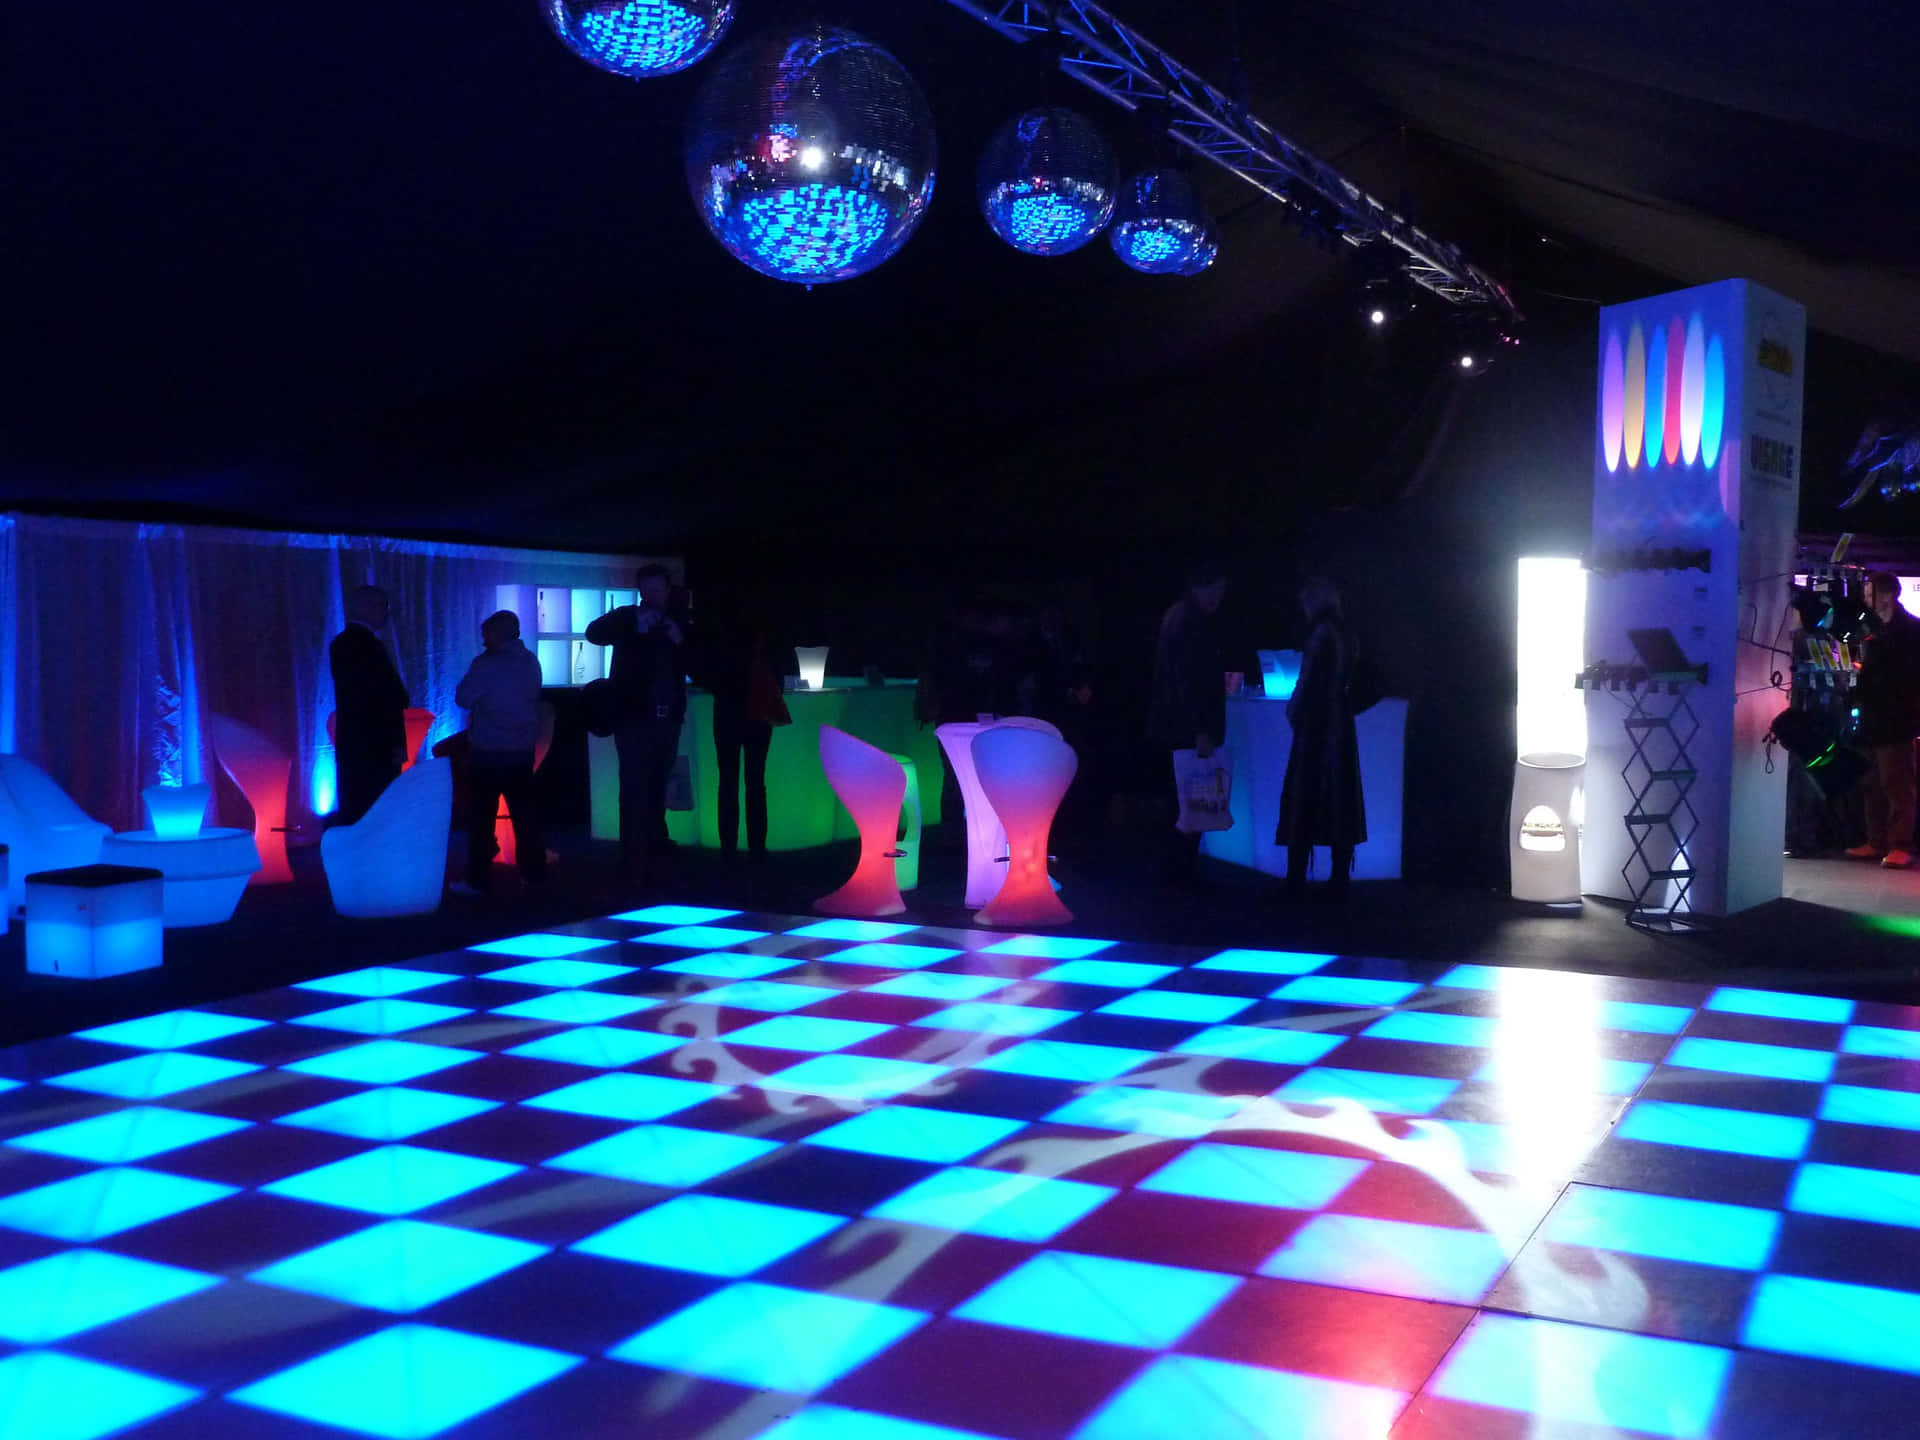 A Large Dance Floor With Blue And White Lights